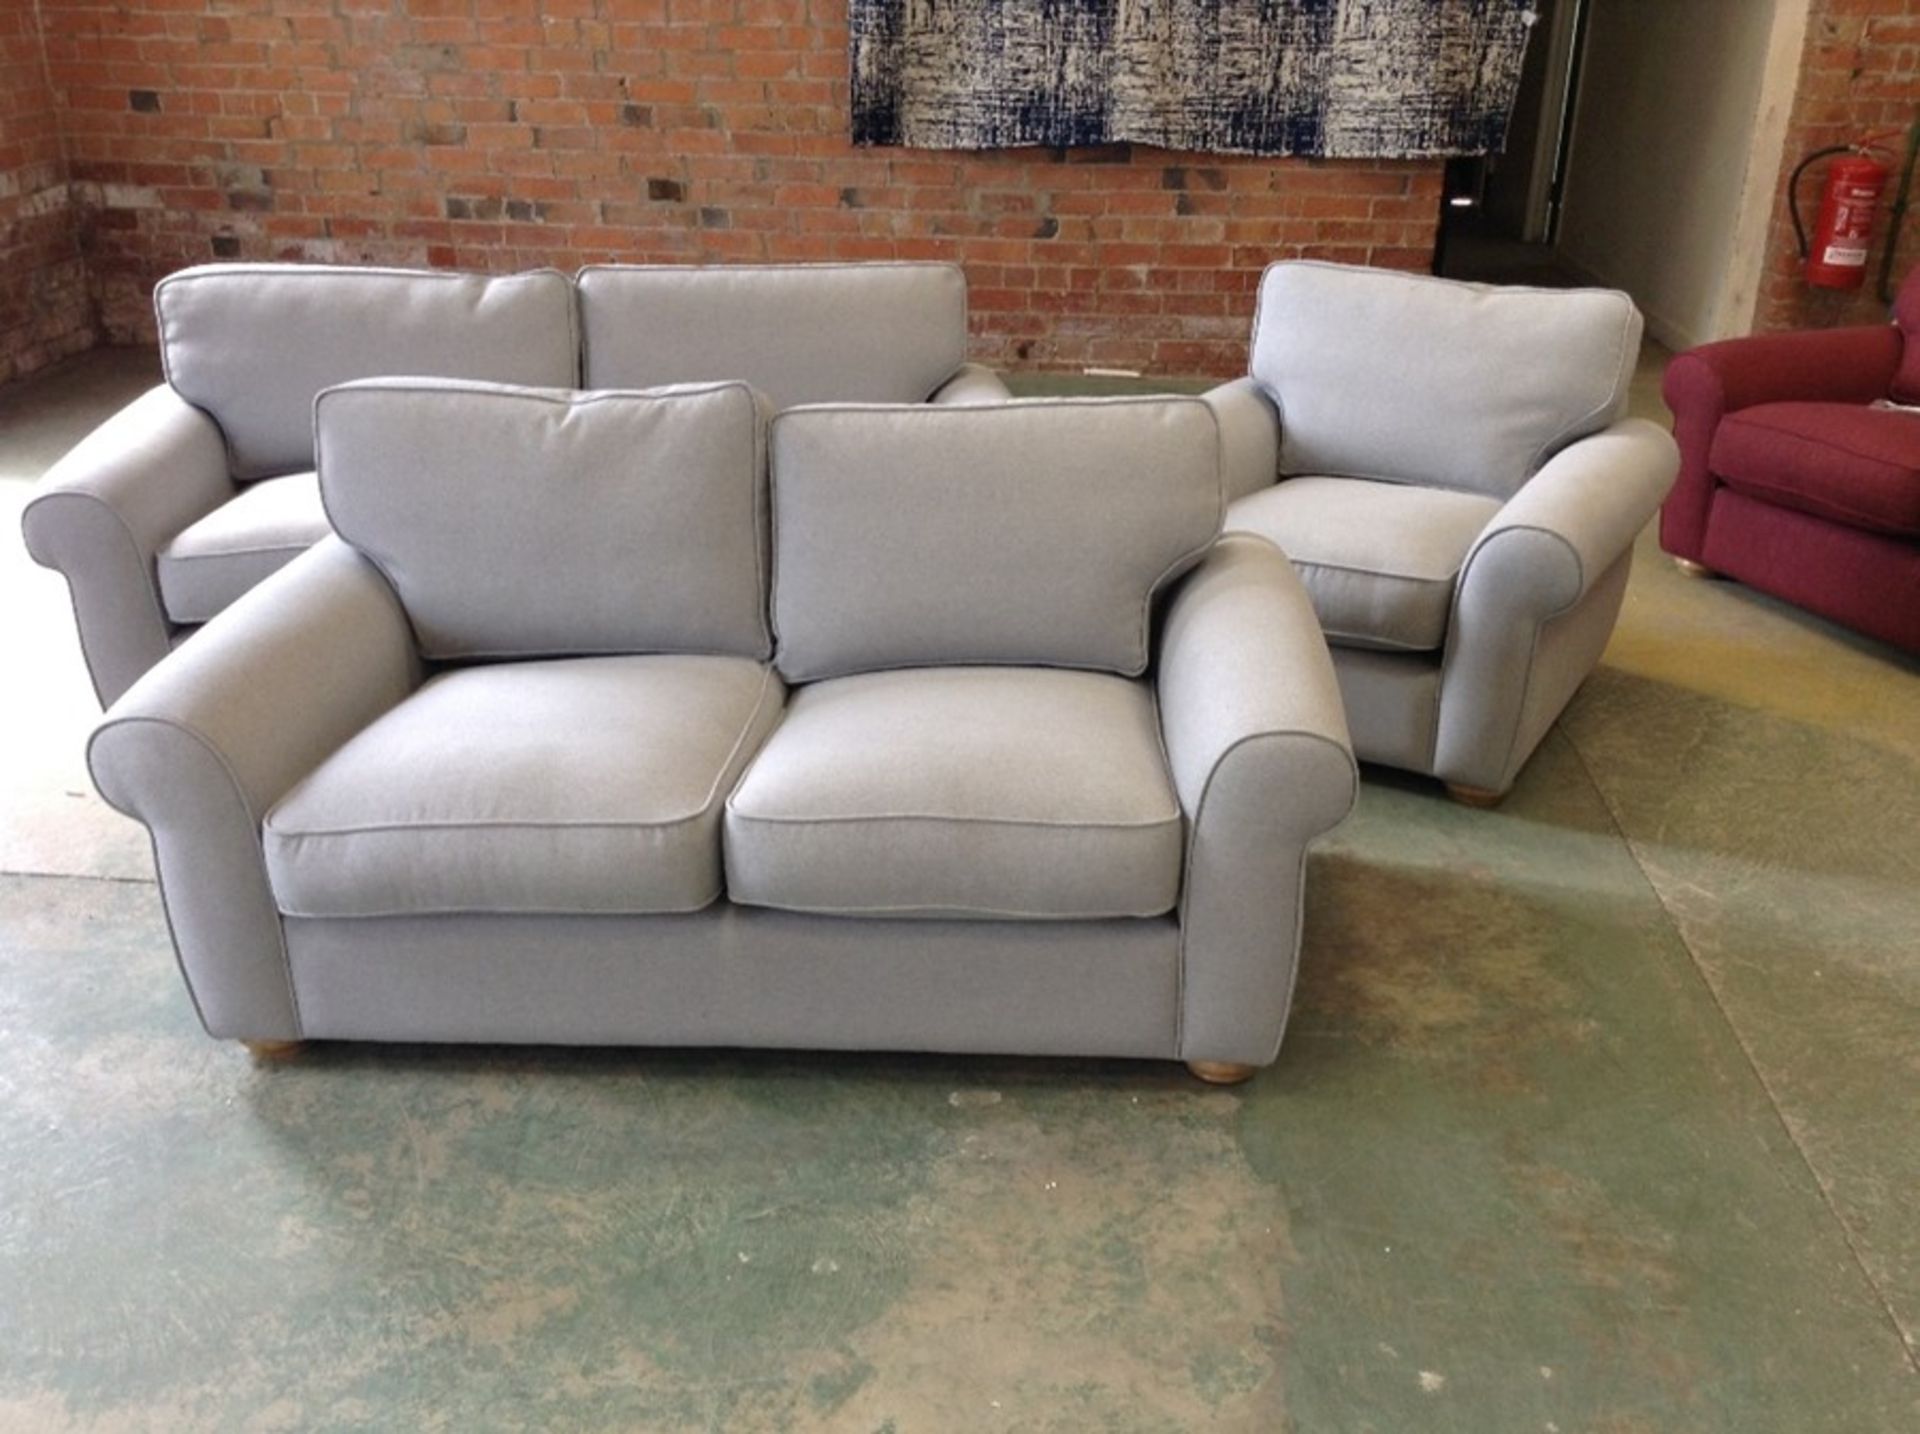 MADISON,DAWSON STORM 2.5 SEATER & 2 SEATER & CHAIR